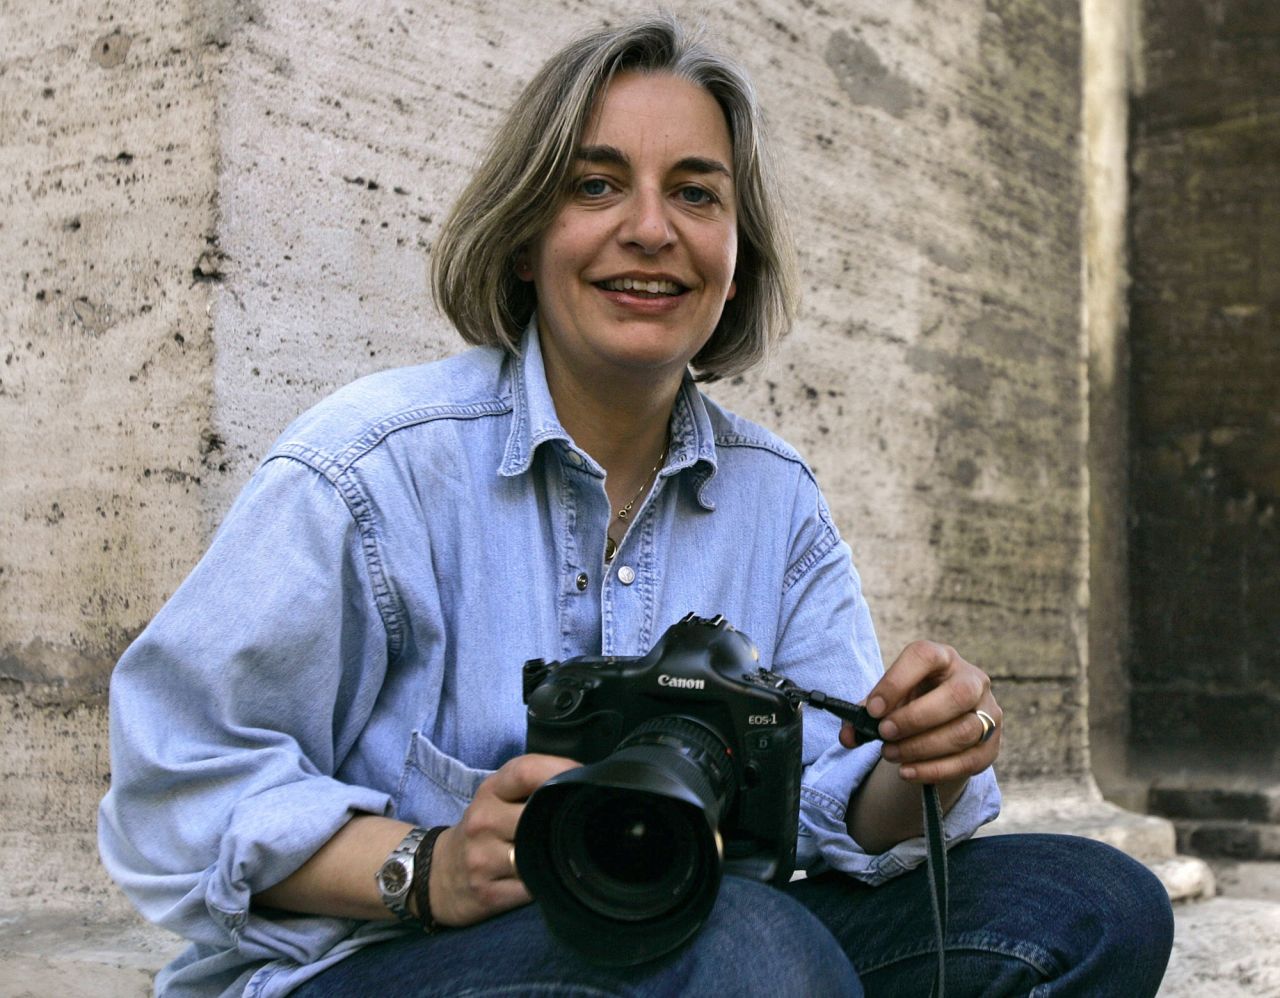 Anja Niedringhaus was a German photojournalist who worked for the Associated Press. She was killed in 2014 while covering Afghanistan's presidential election. An Afghan police officer opened fire on her and her colleague, Kathy Gannon, while they were waiting inside a car. Gannon survived the attack. "Anja showed a side of Afghanistan that few have ever seen. It's just a devastating loss," <a href="https://time.com/3388127/in-memoriam-anja-niedringhaus-1965-2014/" target="_blank" target="_blank">a colleague told Time magazine</a>. Before Afghanistan, Niedringhaus worked in many conflict zones and spent a decade covering the wars in the former Yugoslavia. Santiago Lyon, who was the AP's vice president and director of photography, said Niedringhaus "consistently volunteered for the hardest assignments and was remarkably resilient in carrying them out time after time. She truly believed in the need to bear witness."